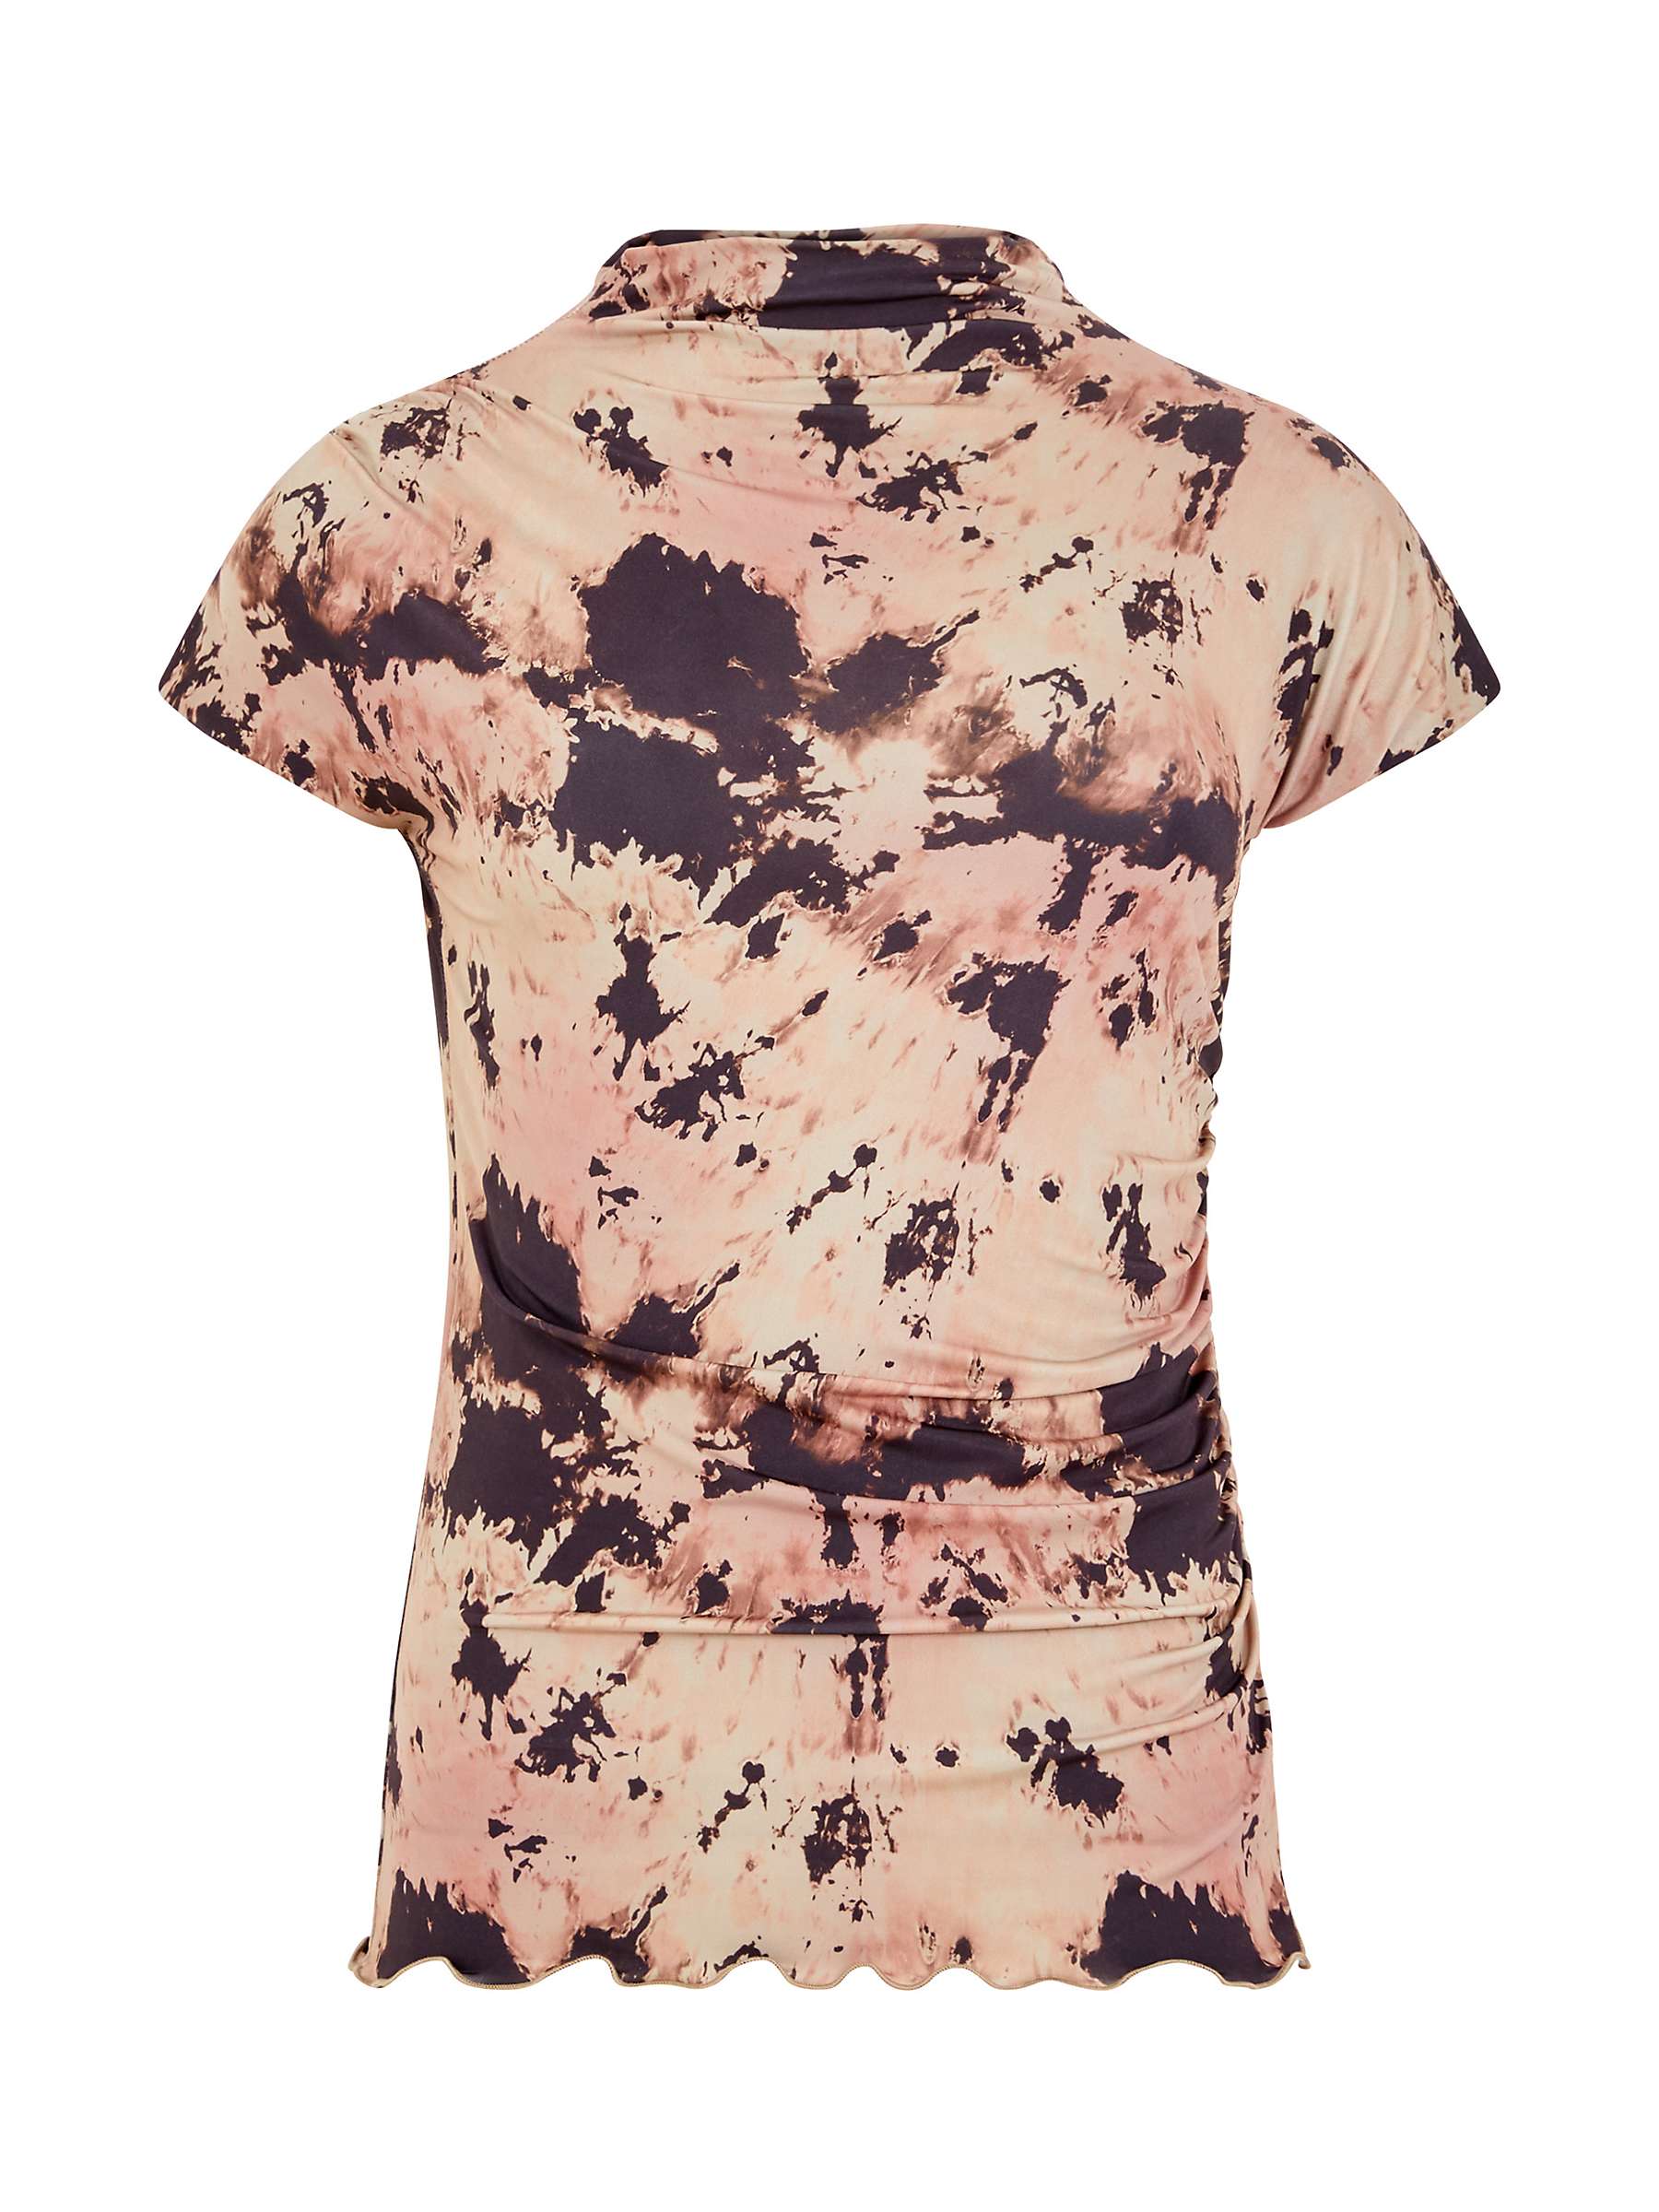 Buy French Connection Riya Ava Abstract Print Top, Mocha/Multi Online at johnlewis.com